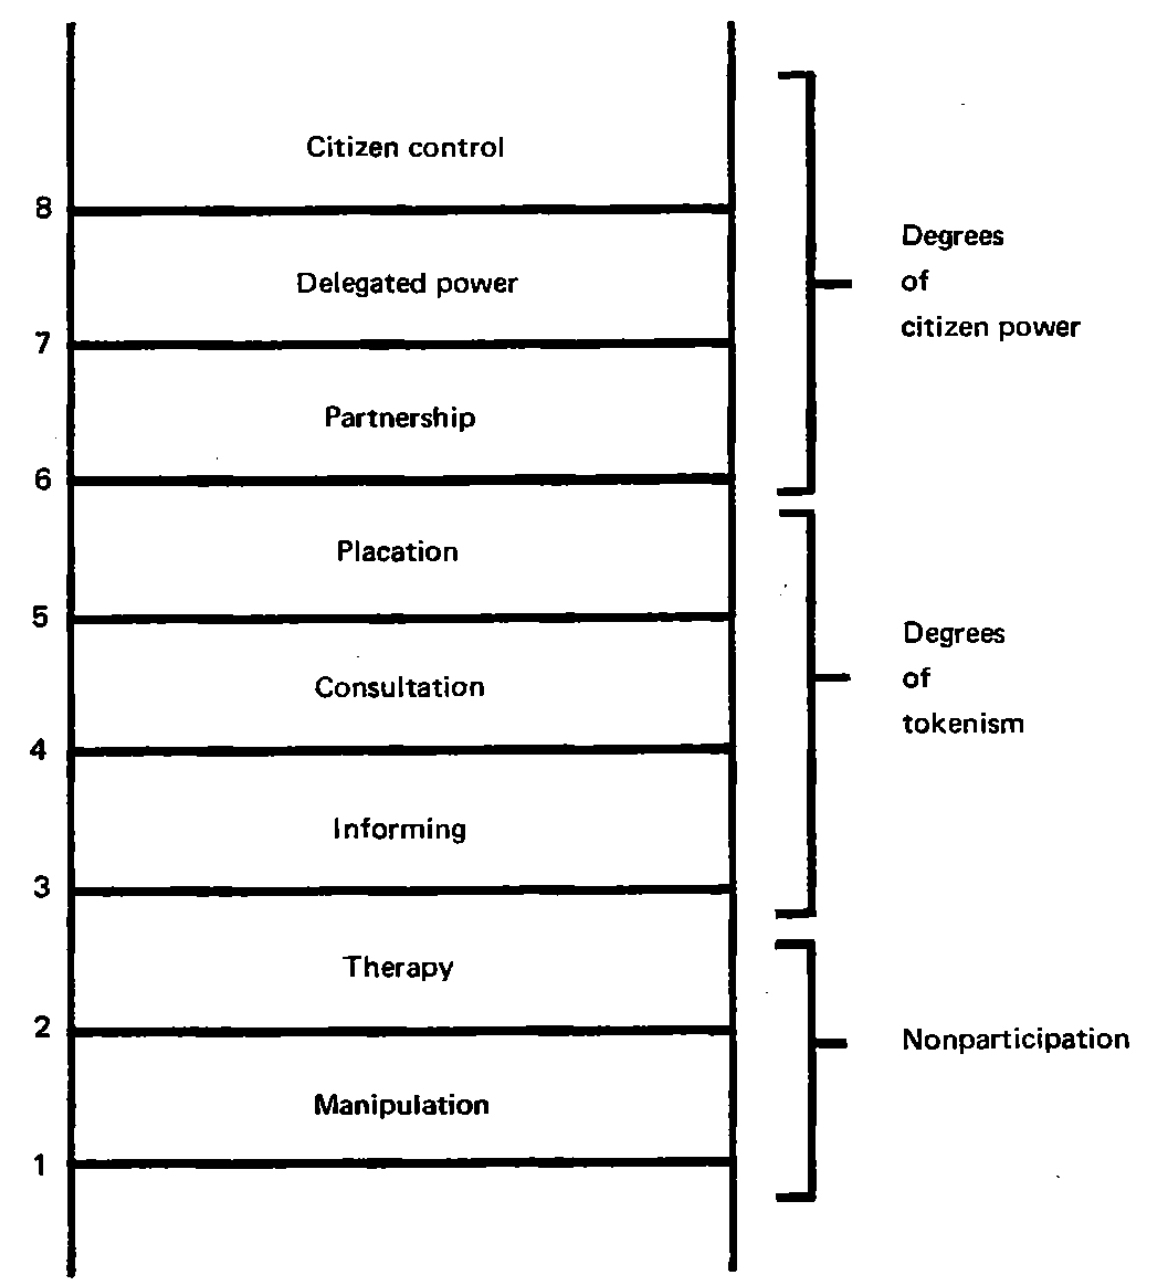 This is the original 1969 illustration of Sherry Arnstein’s Ladder of Citizen Participation as it appeared in the Journal of the American Planning Association.